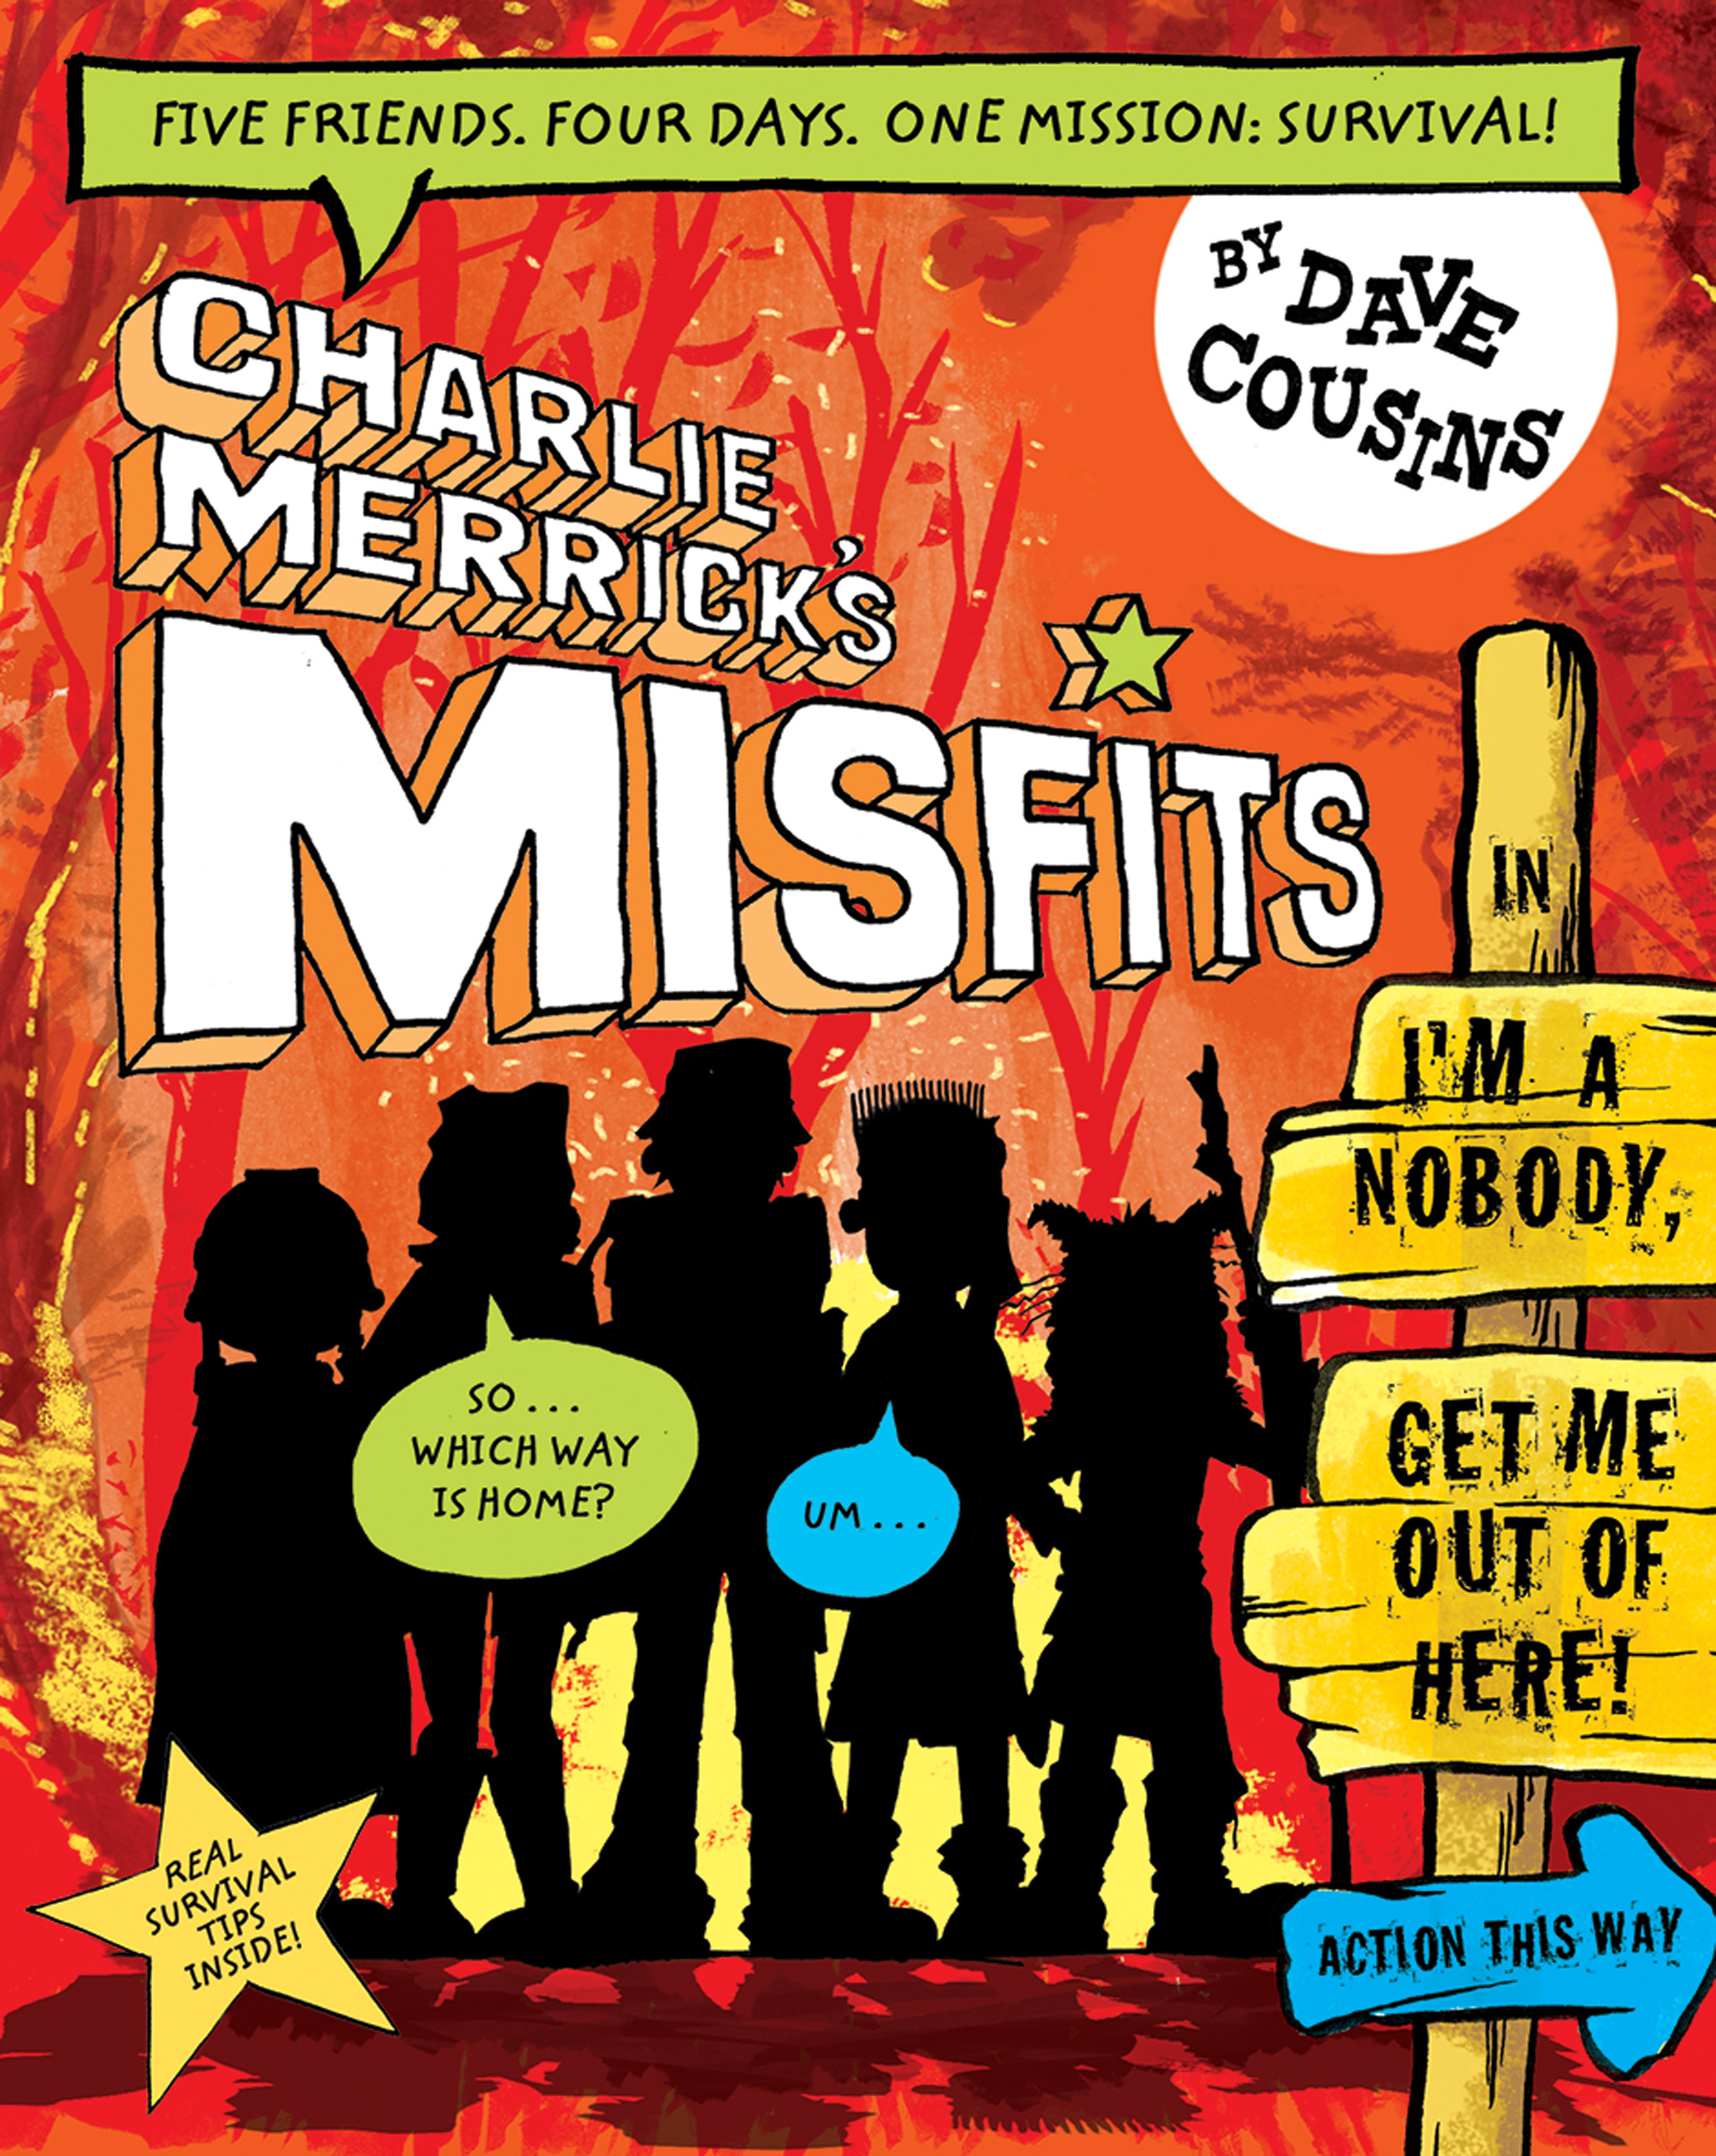 Charlie Merrick's Misfits in I'm a Nobody, Get Me Out of Here!